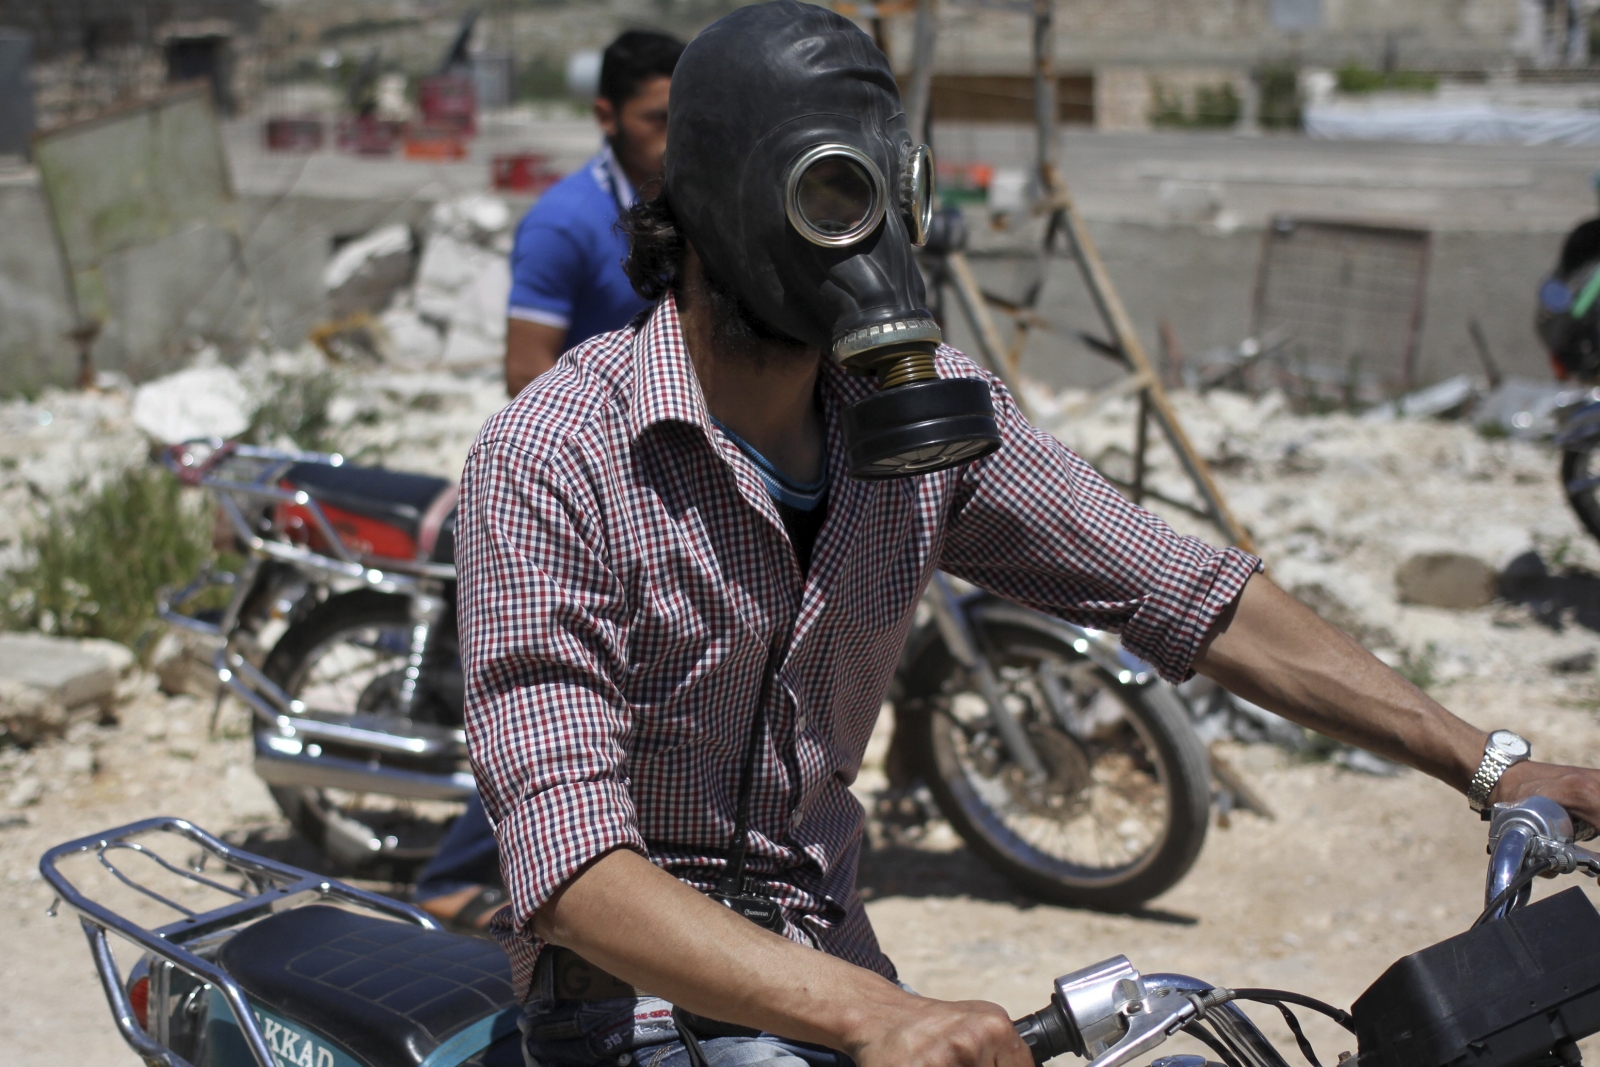 Syria Assad Chlorine Attack Reported In Idlib Province As Rebels Gain Ground